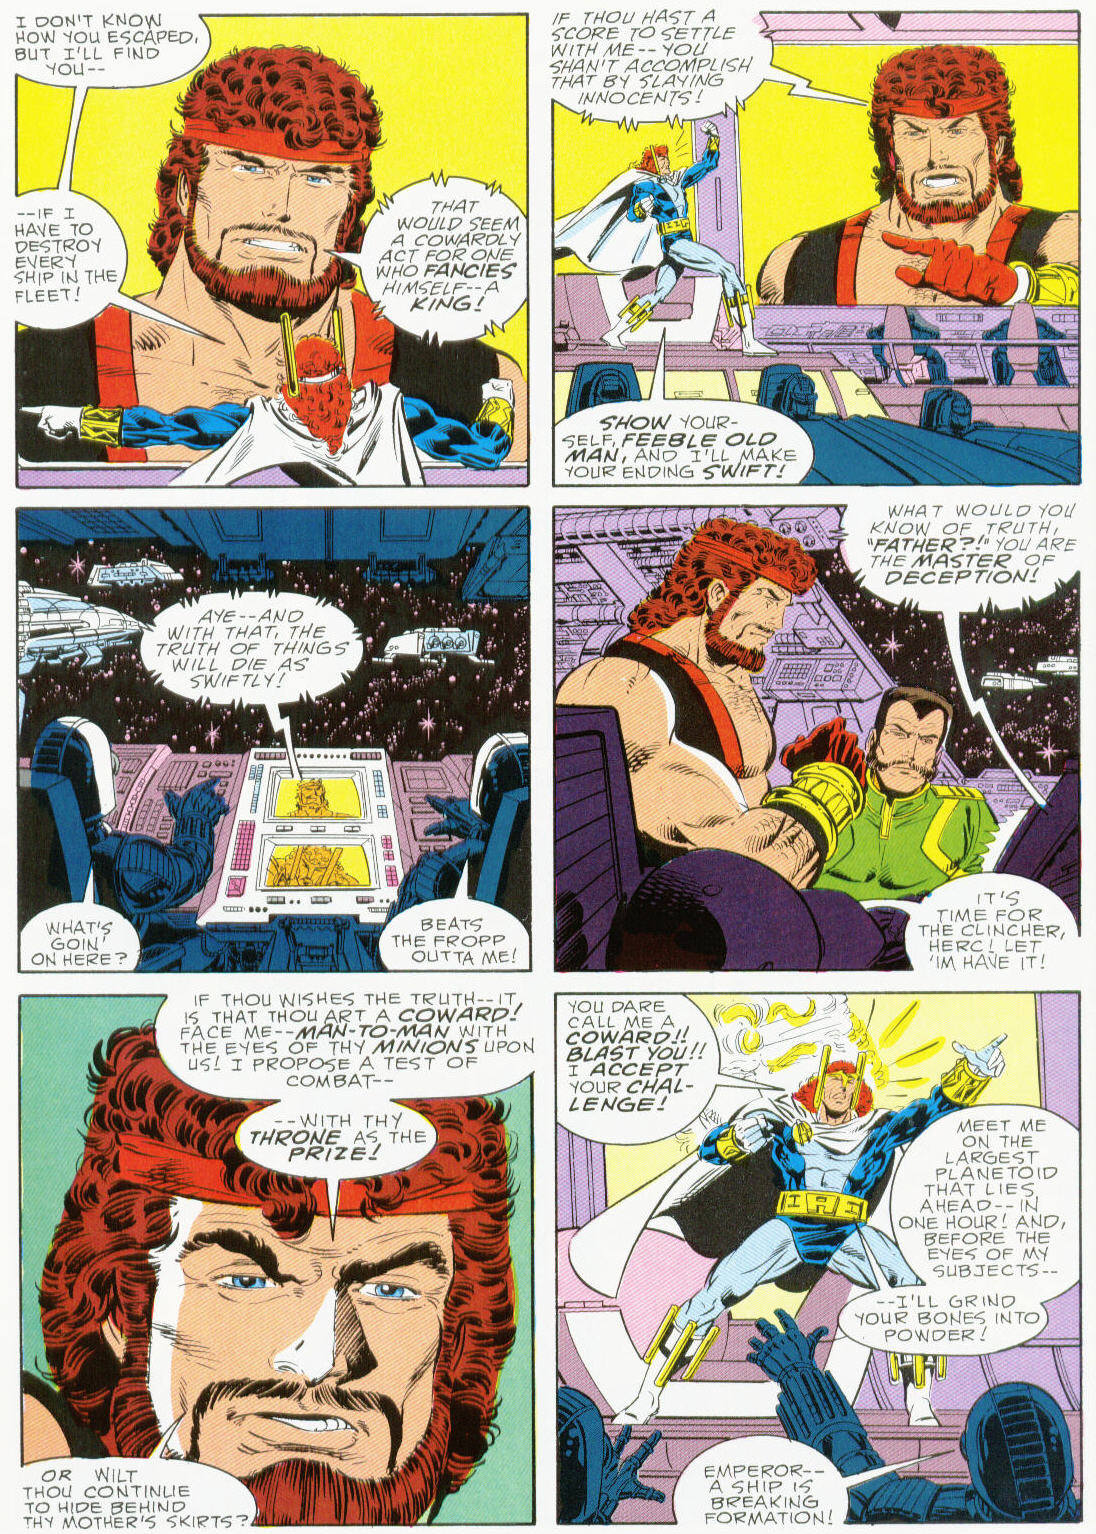 Marvel Graphic Novel issue 37 - Hercules Prince of Power - Full Circle - Page 62